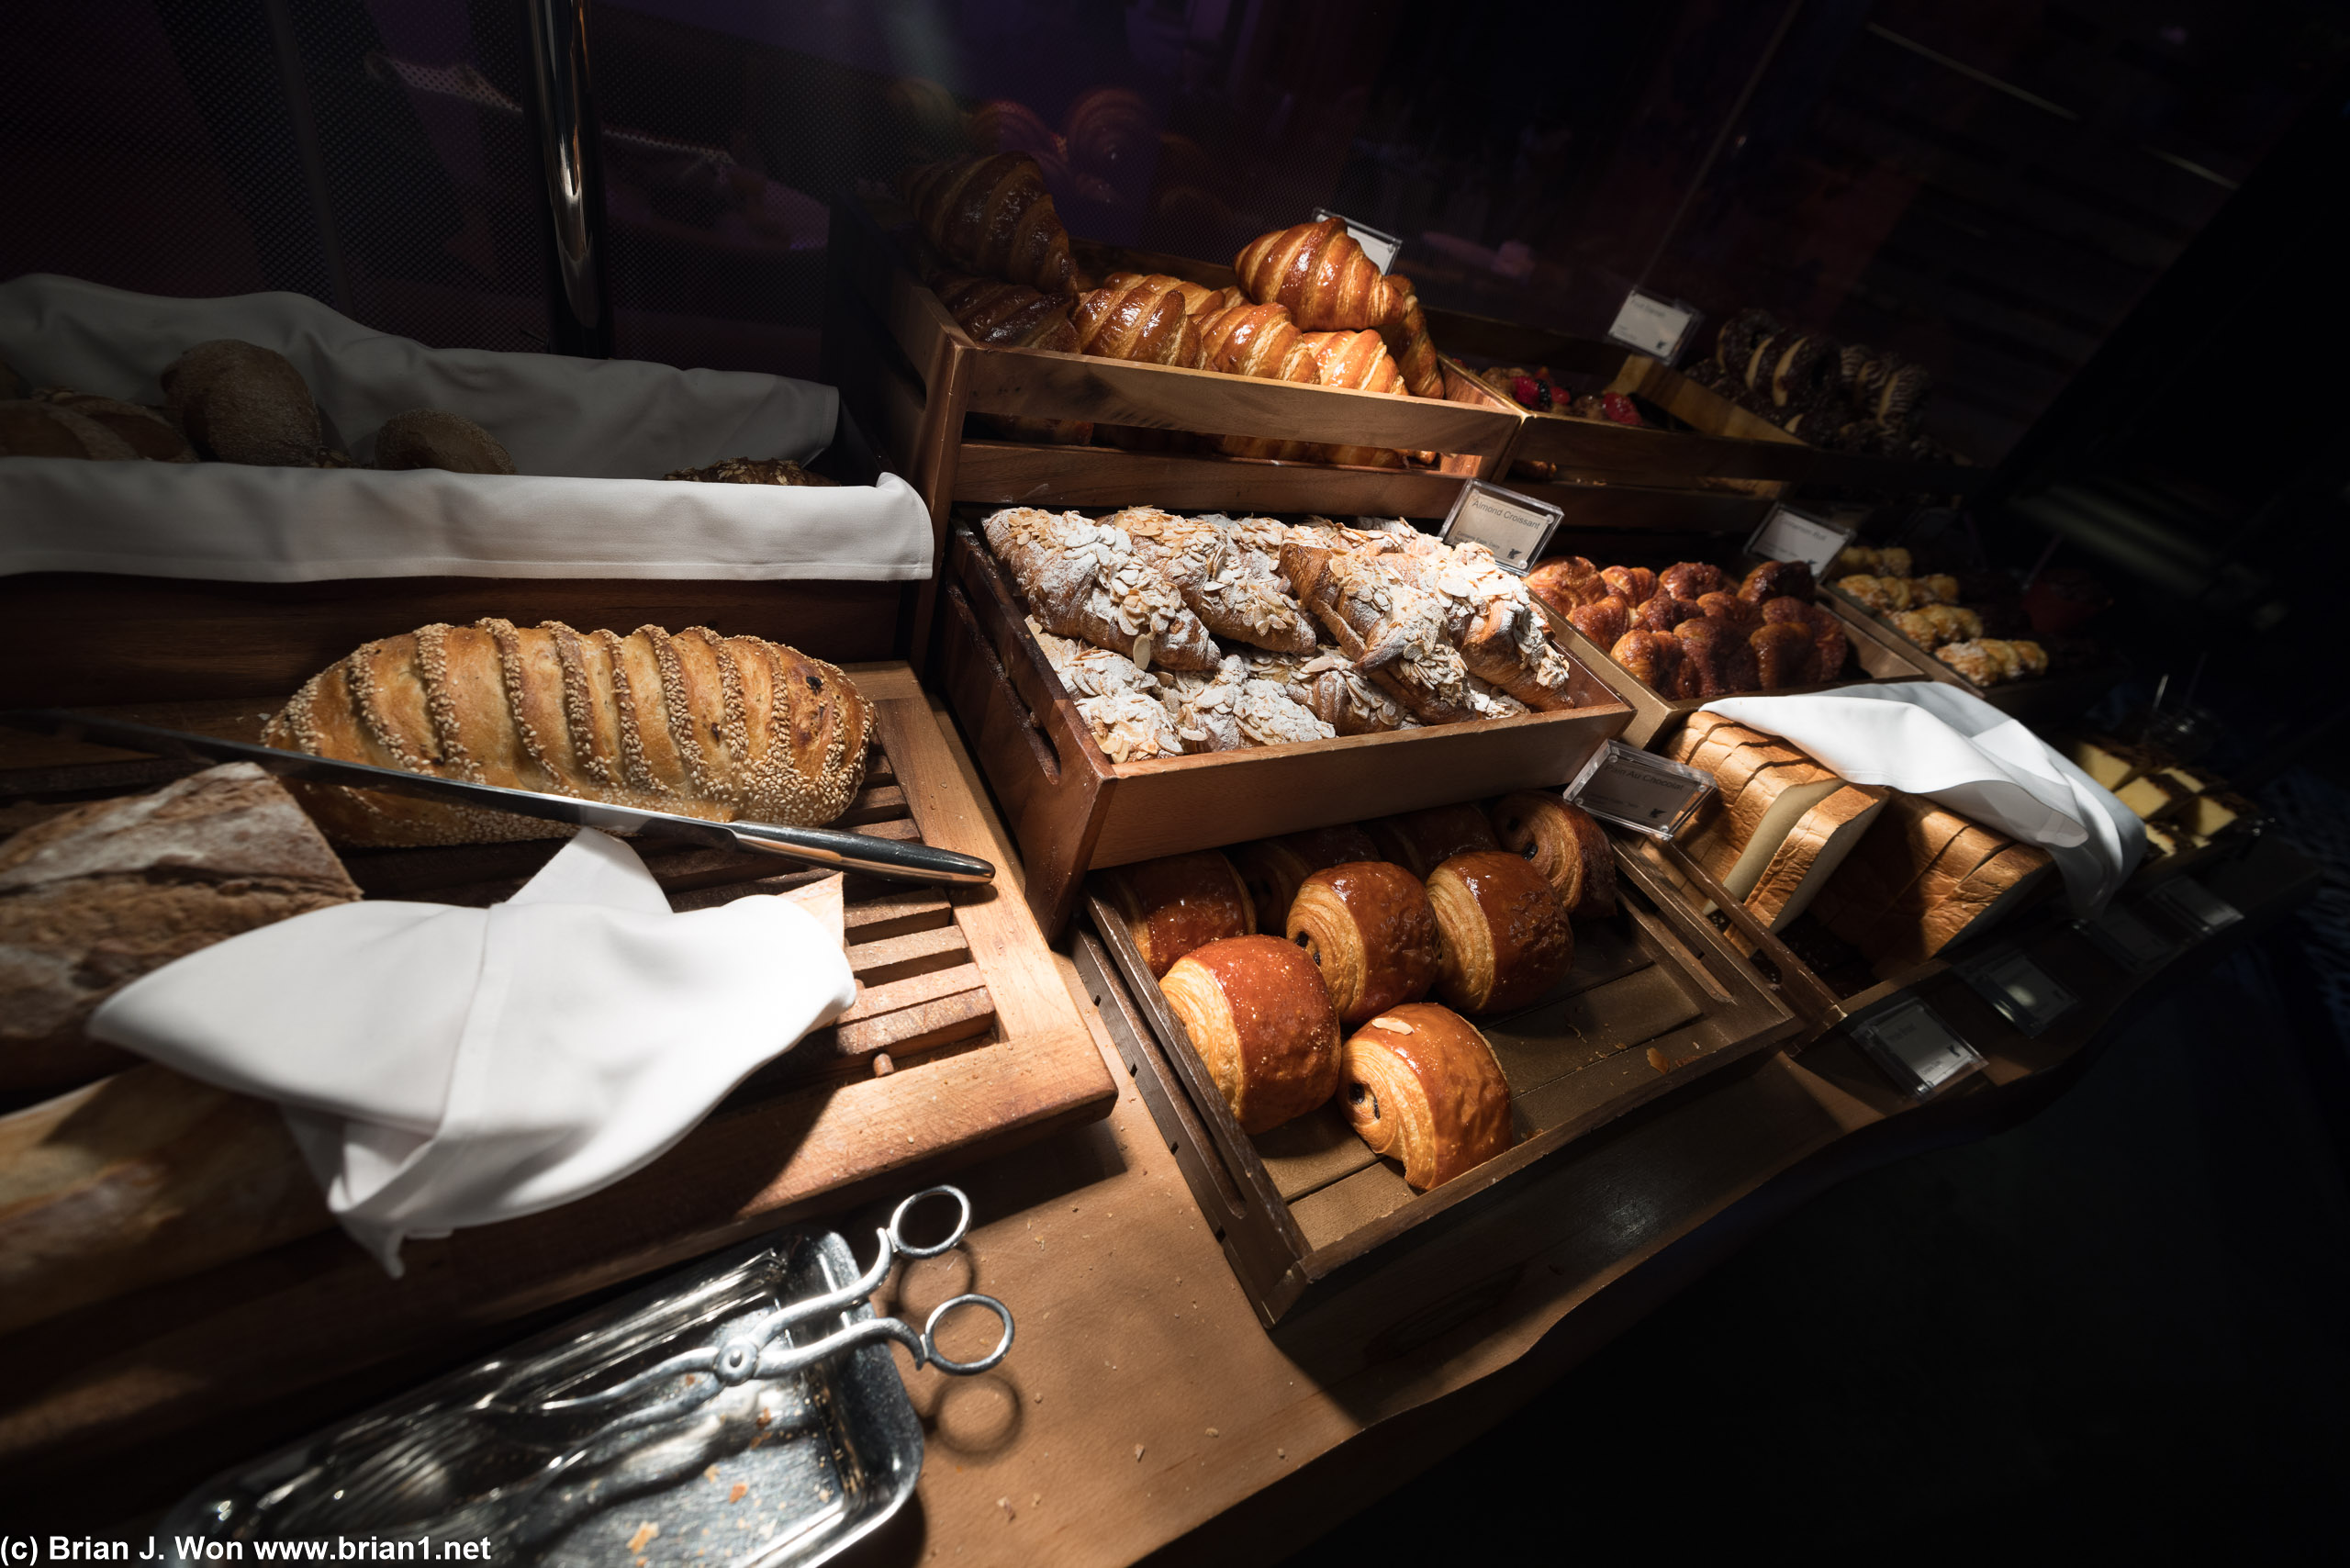 Bread and pastries.